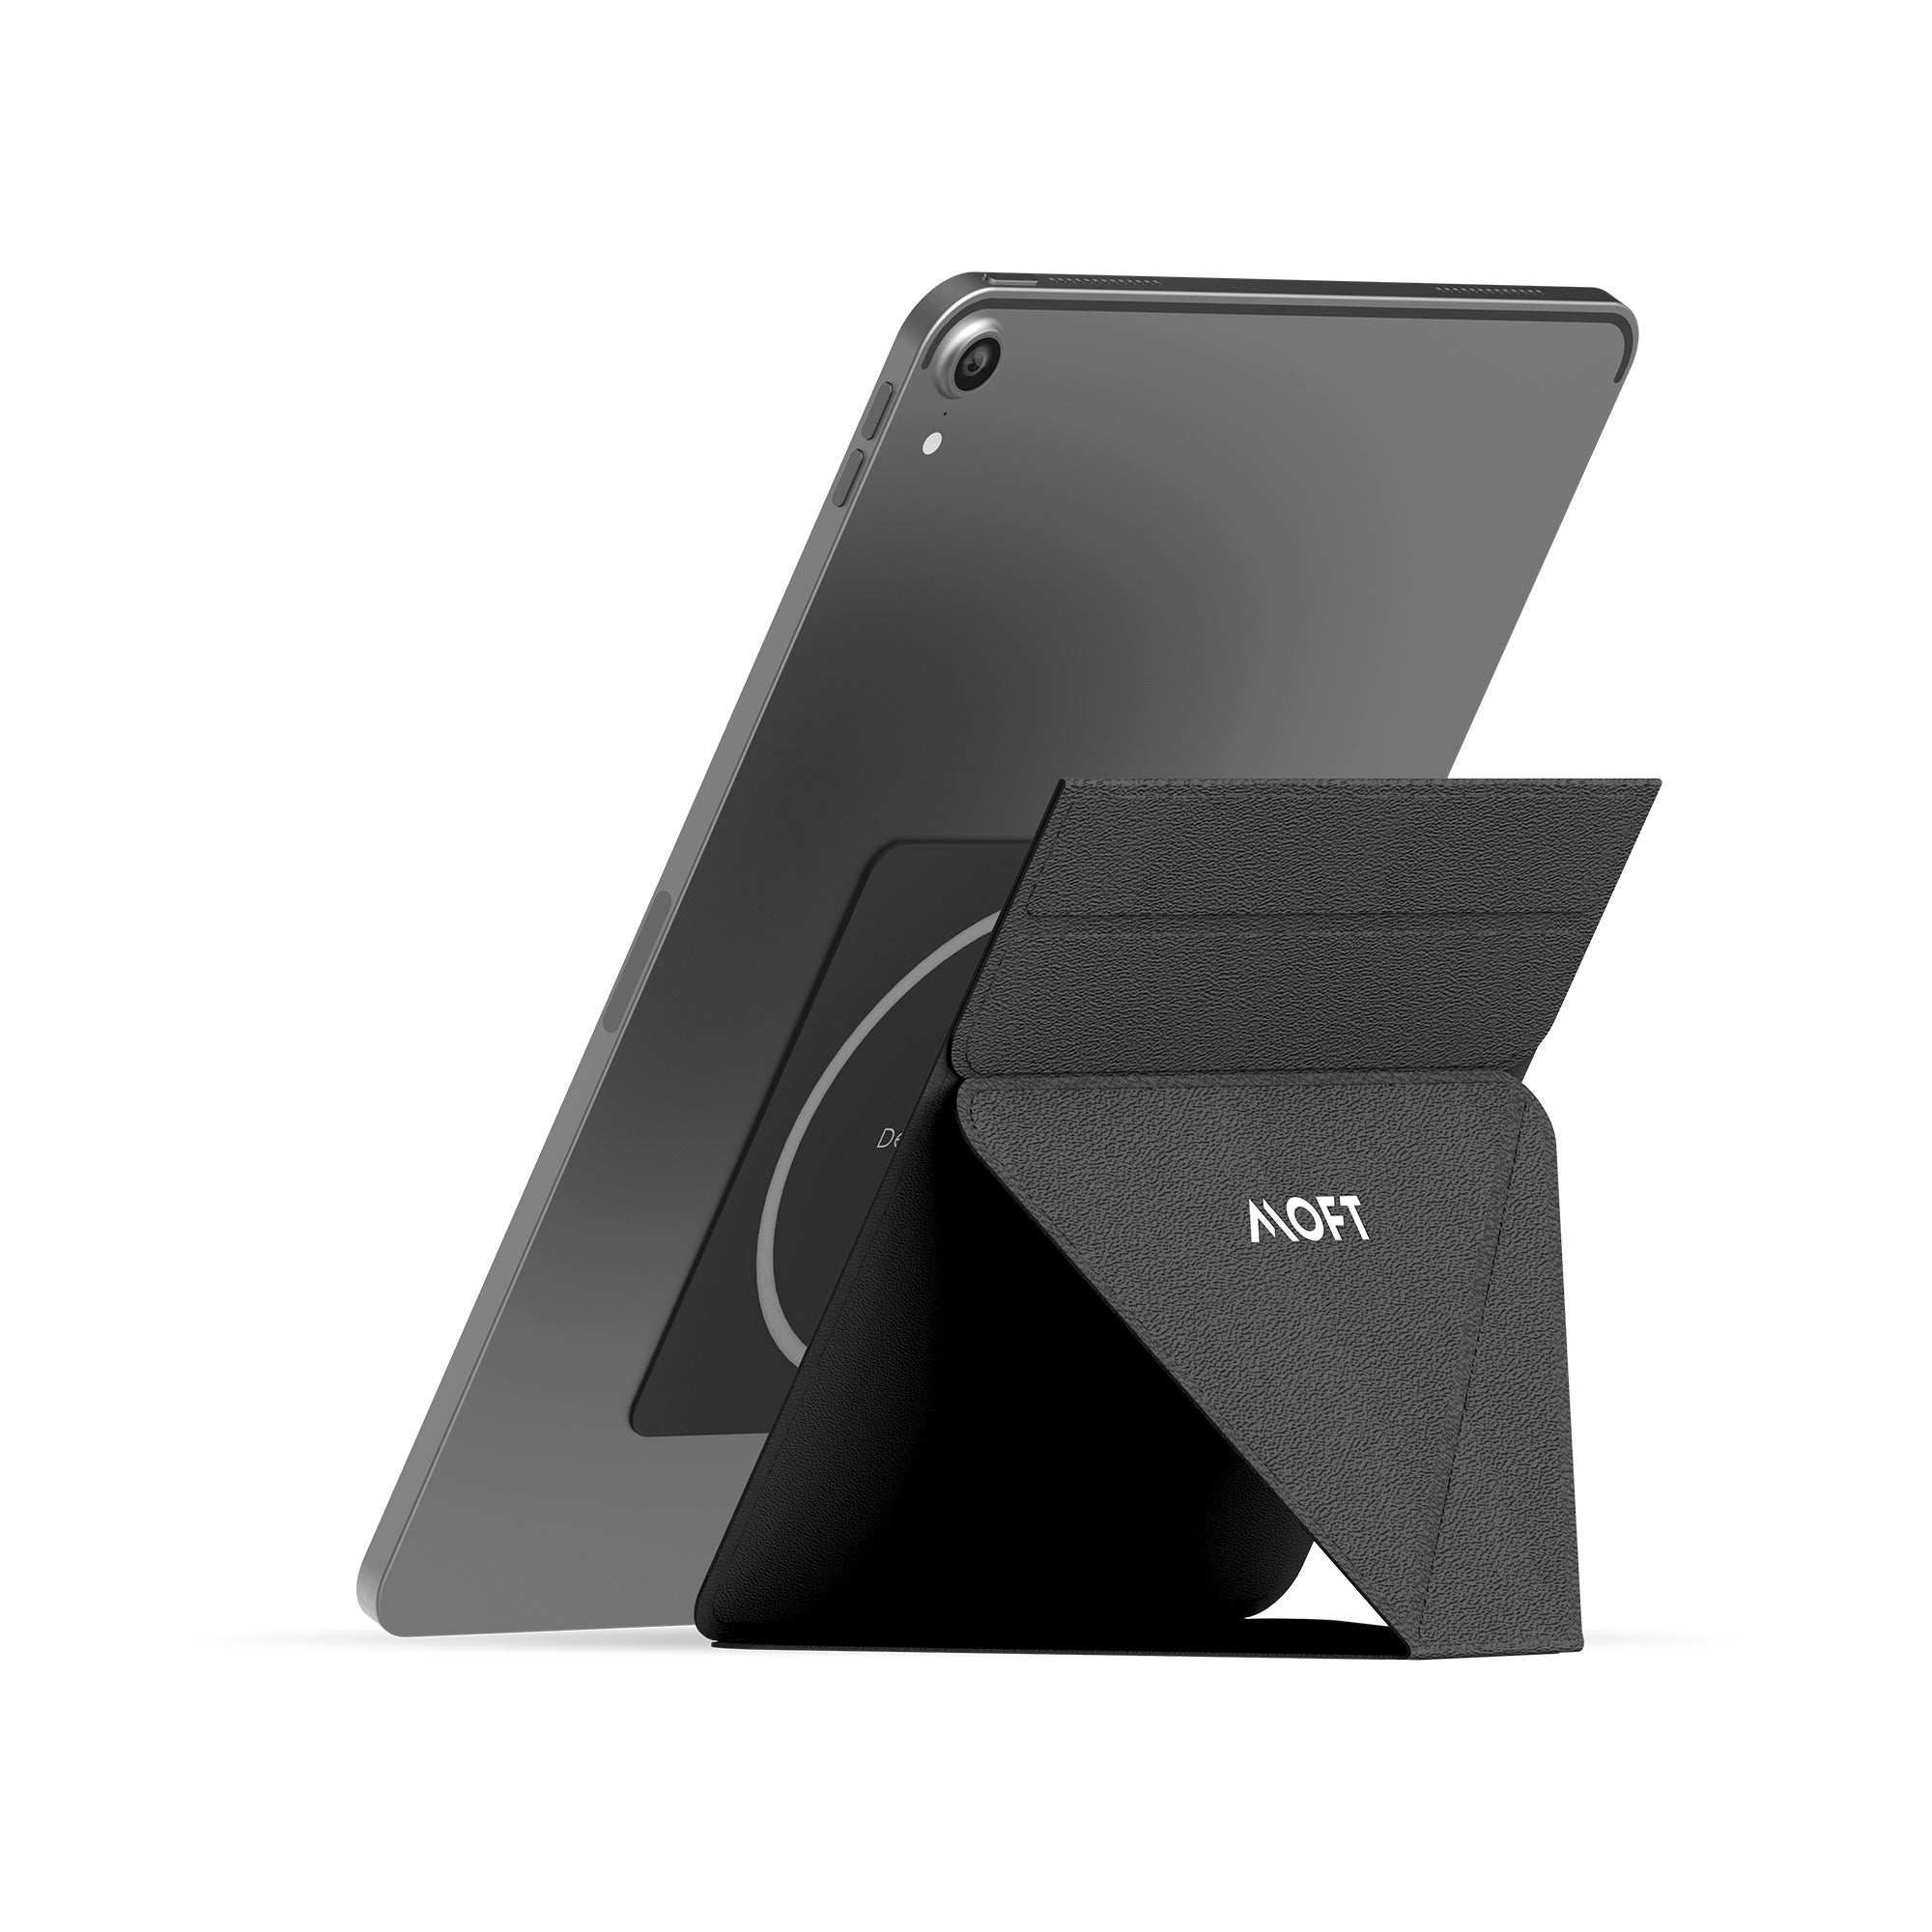 MOFT Snap Tablet Stand - Black